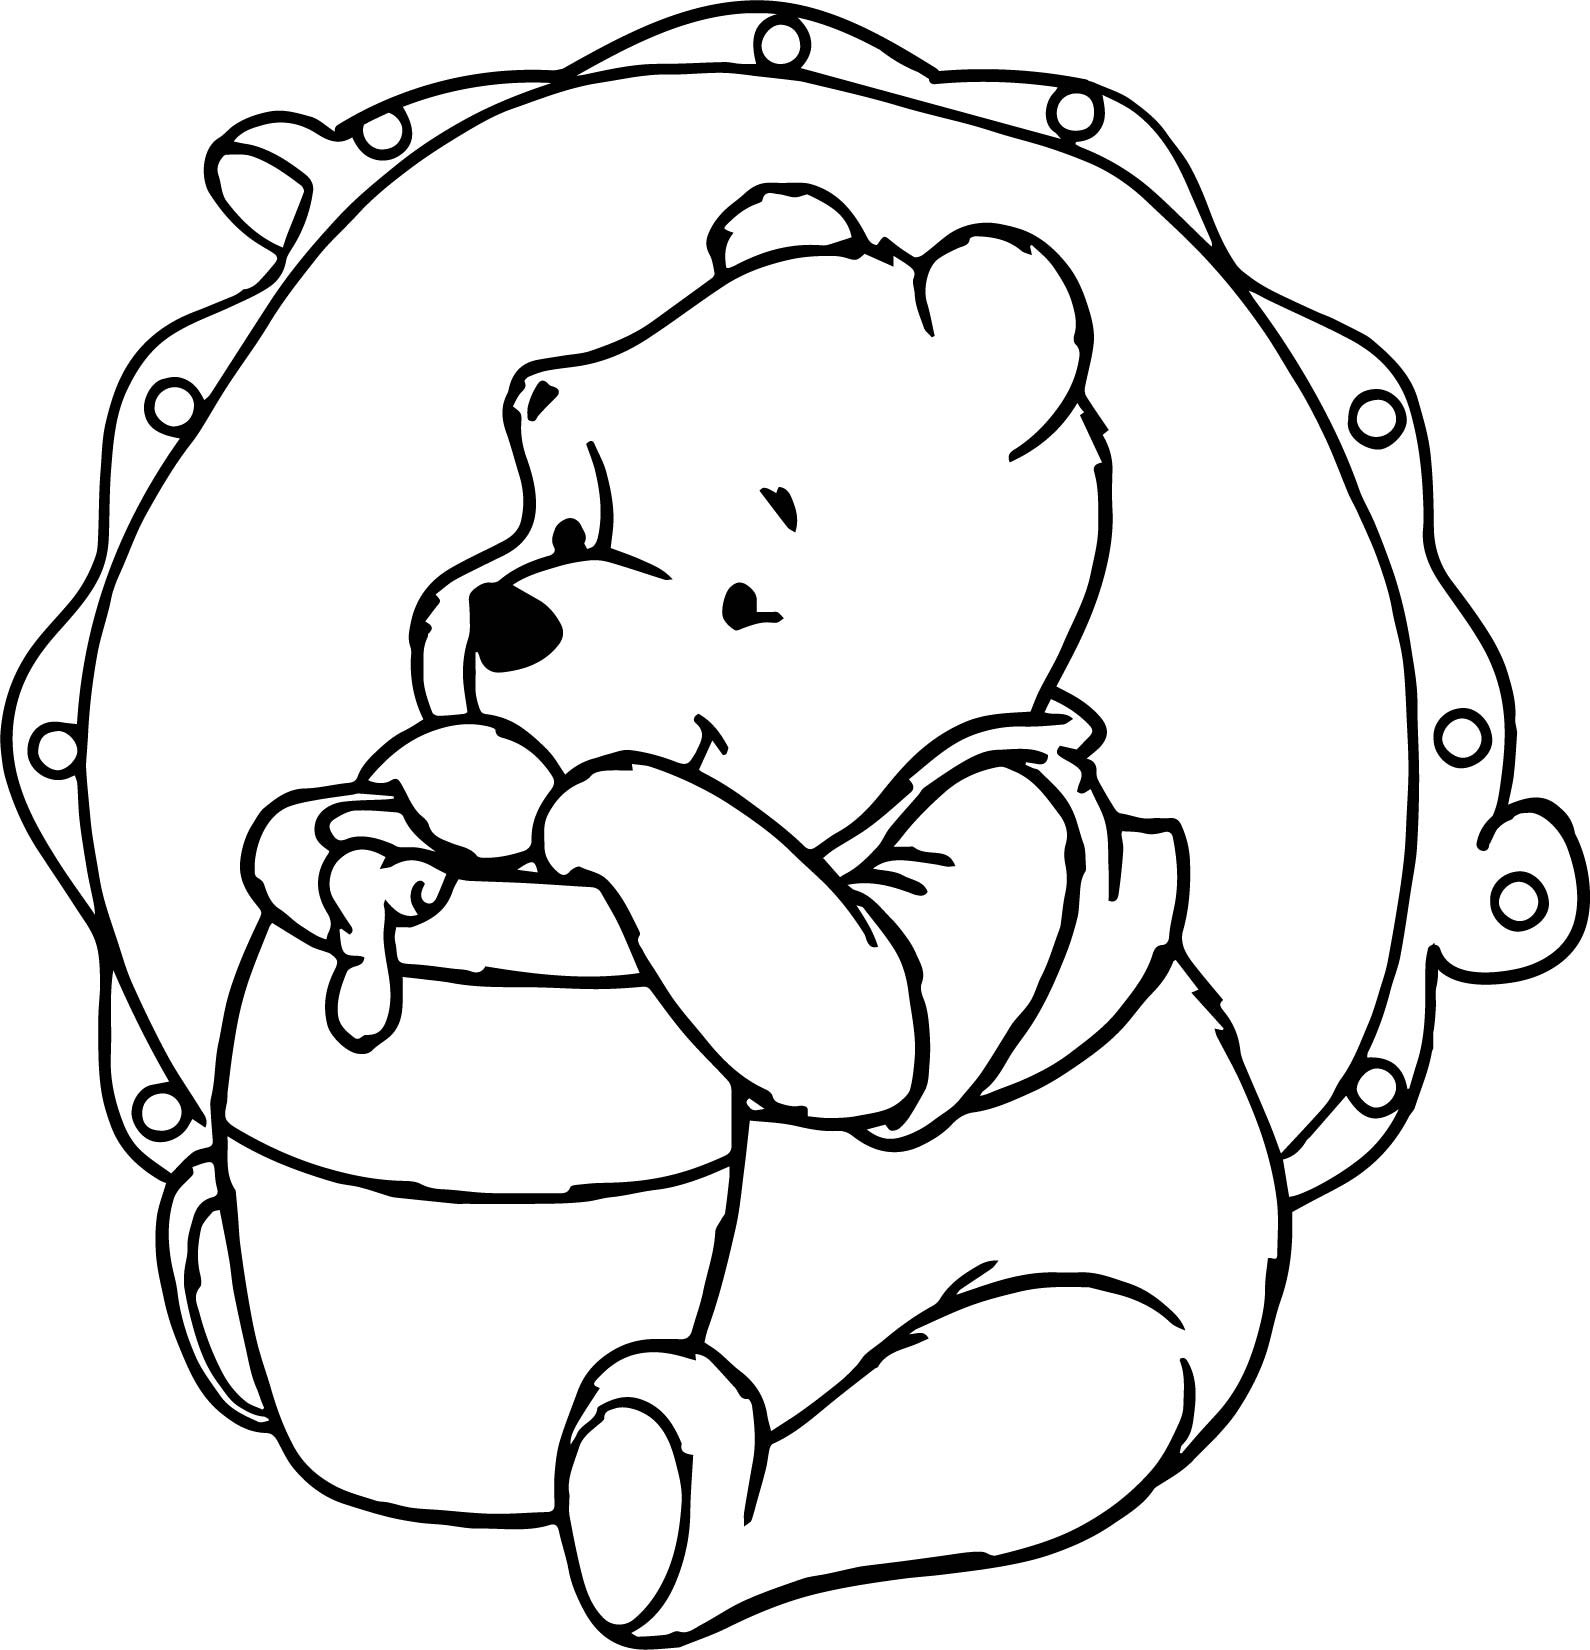 Winnie The Pooh Image Coloring Page - Wecoloringpage.com